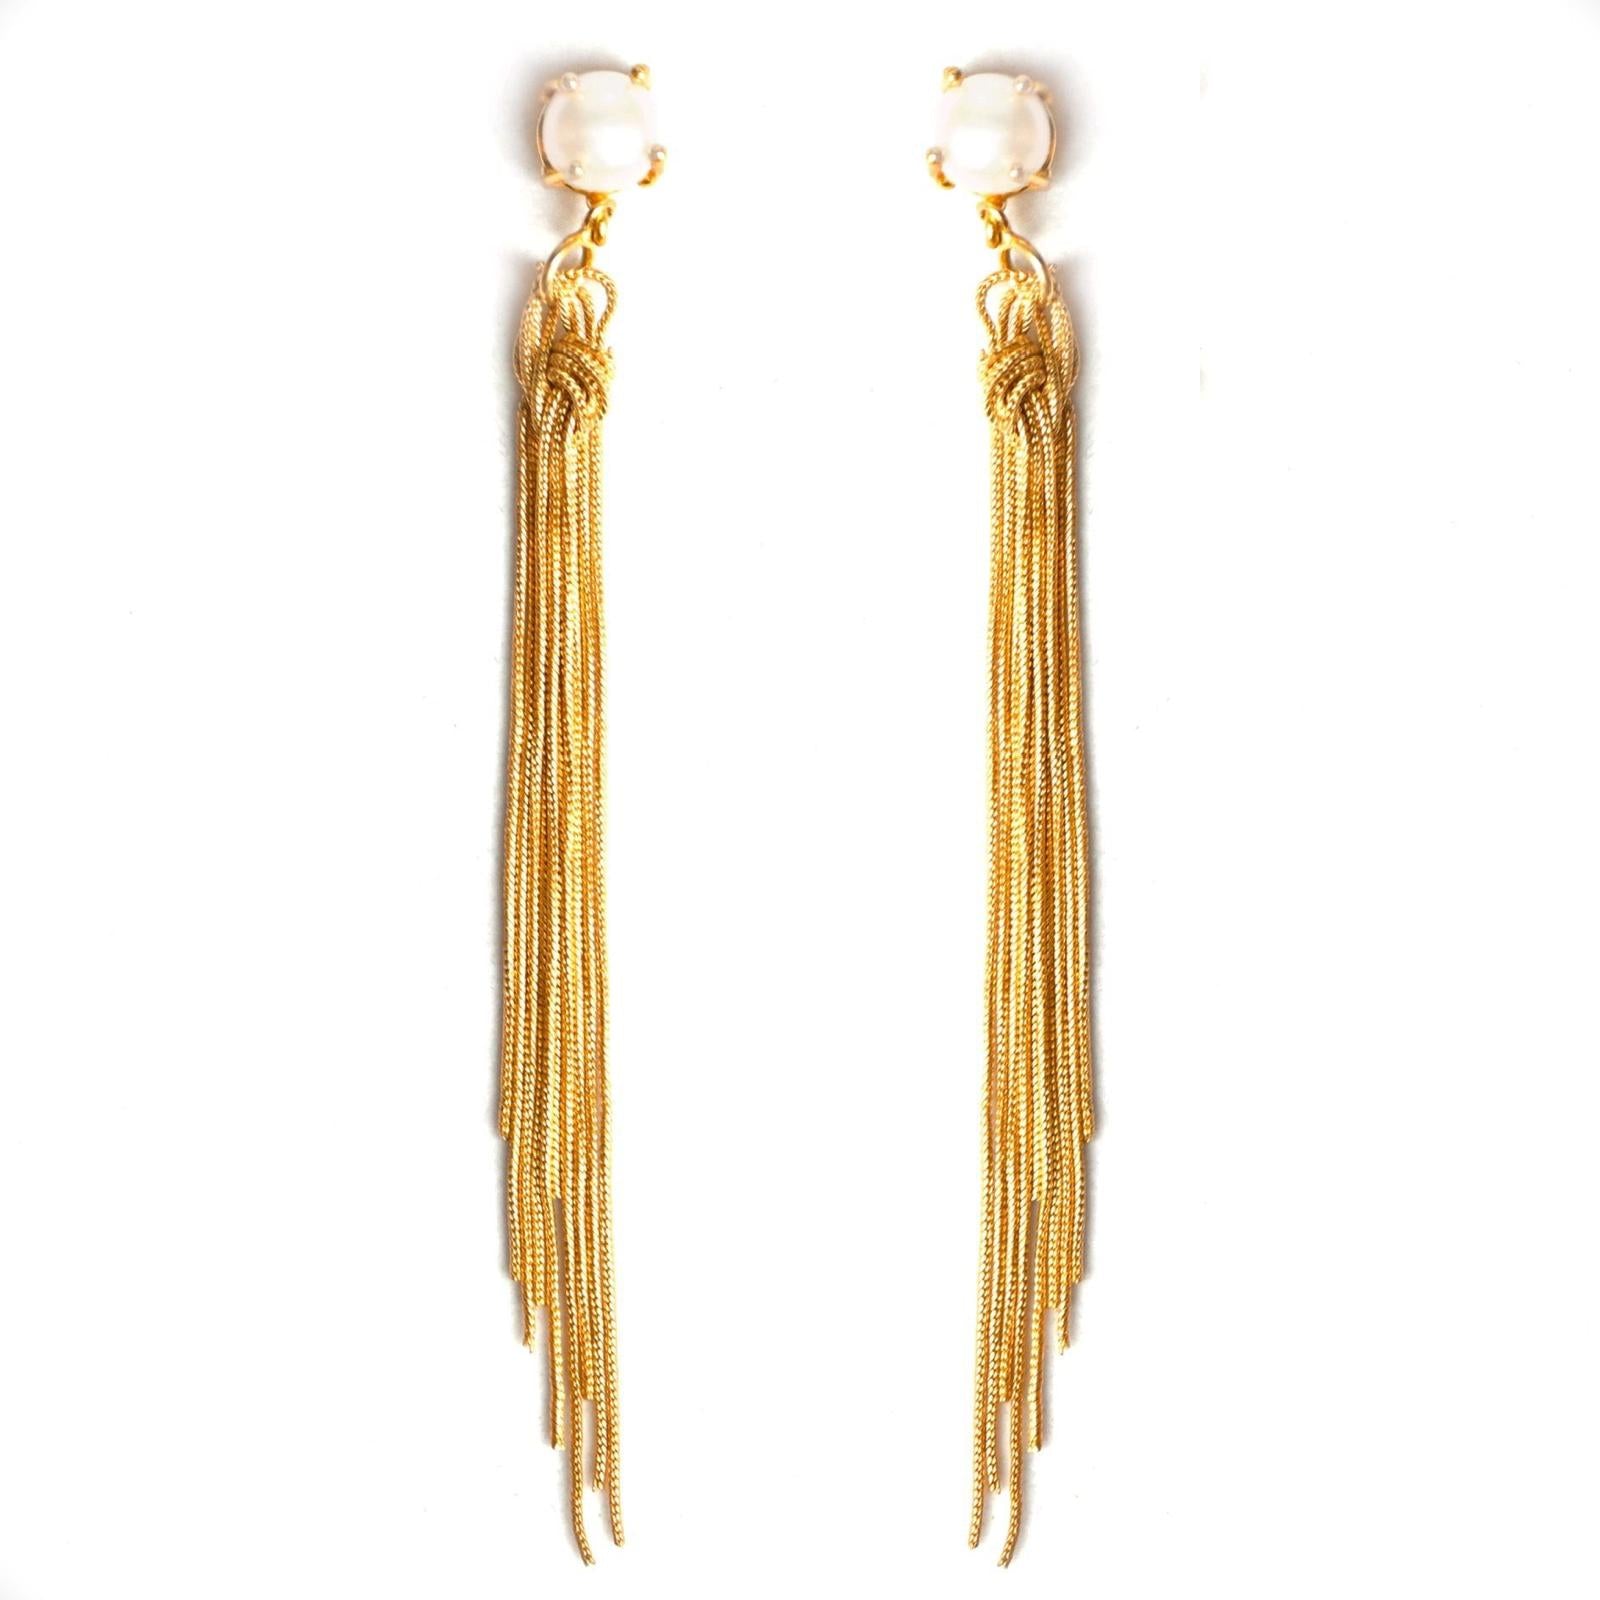 Diva Pearl Freshwater Pearl (Claw) Statement Earrings